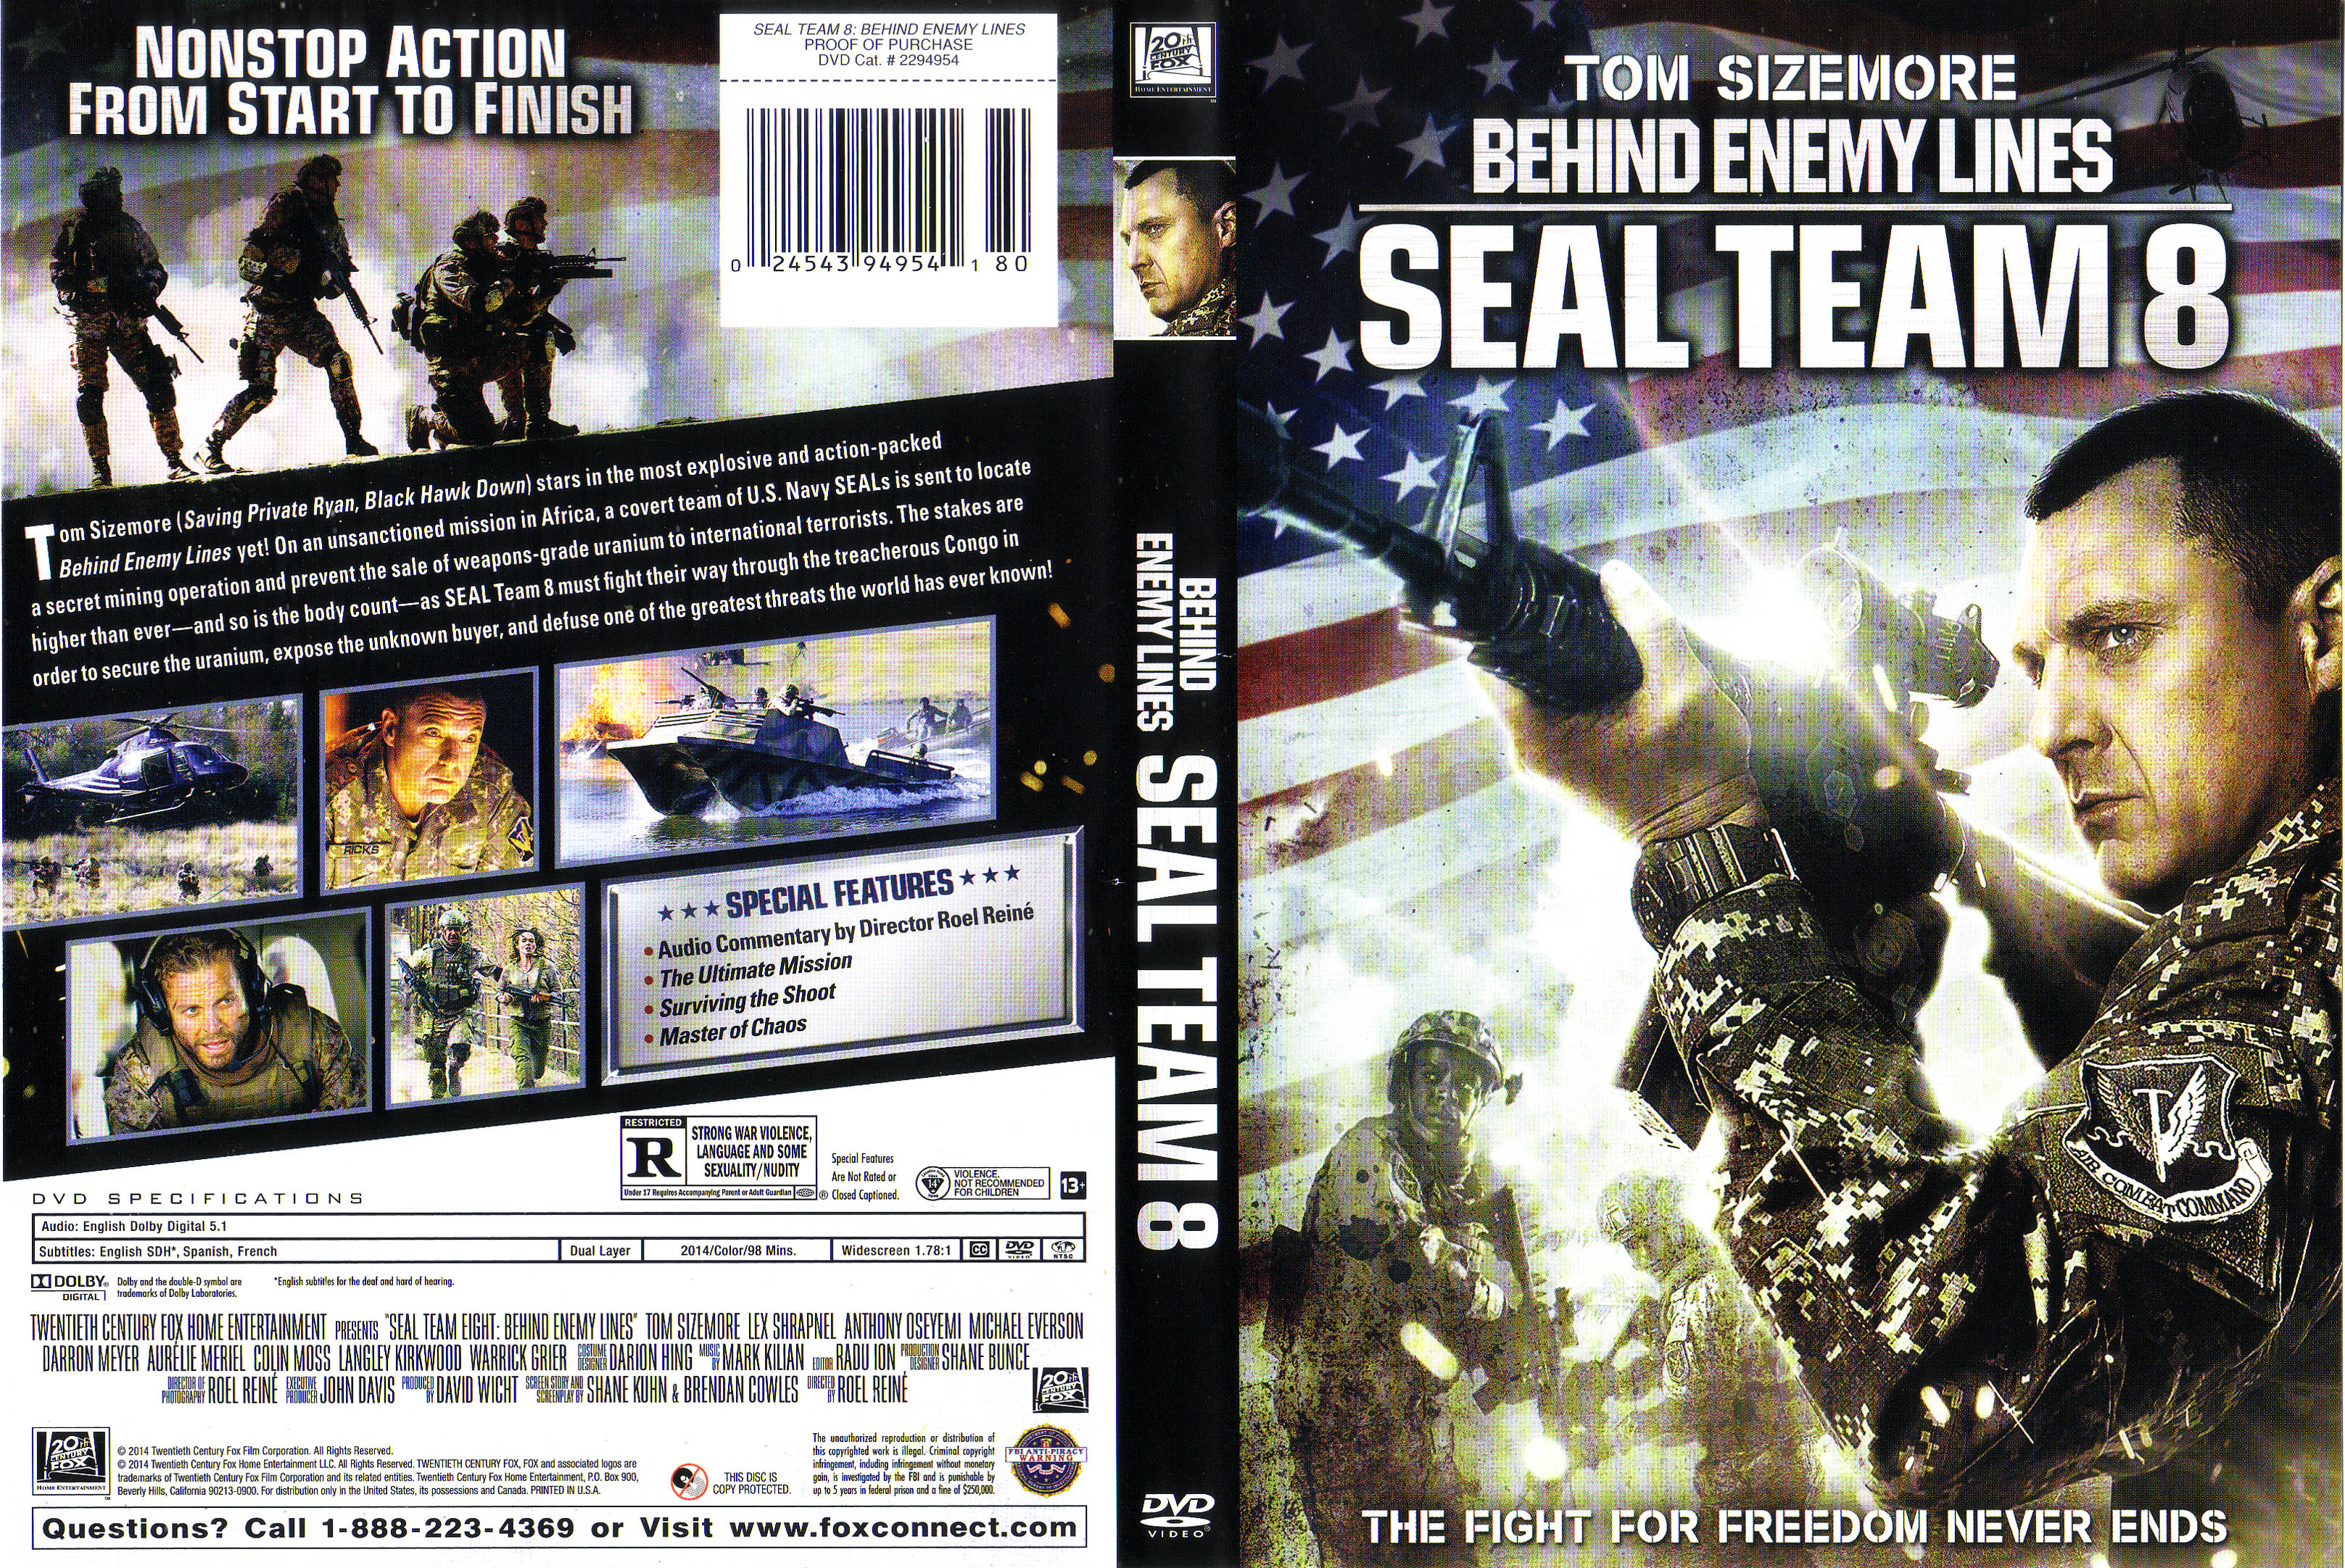 Jaquette DVD Seal team 8 Zone 1